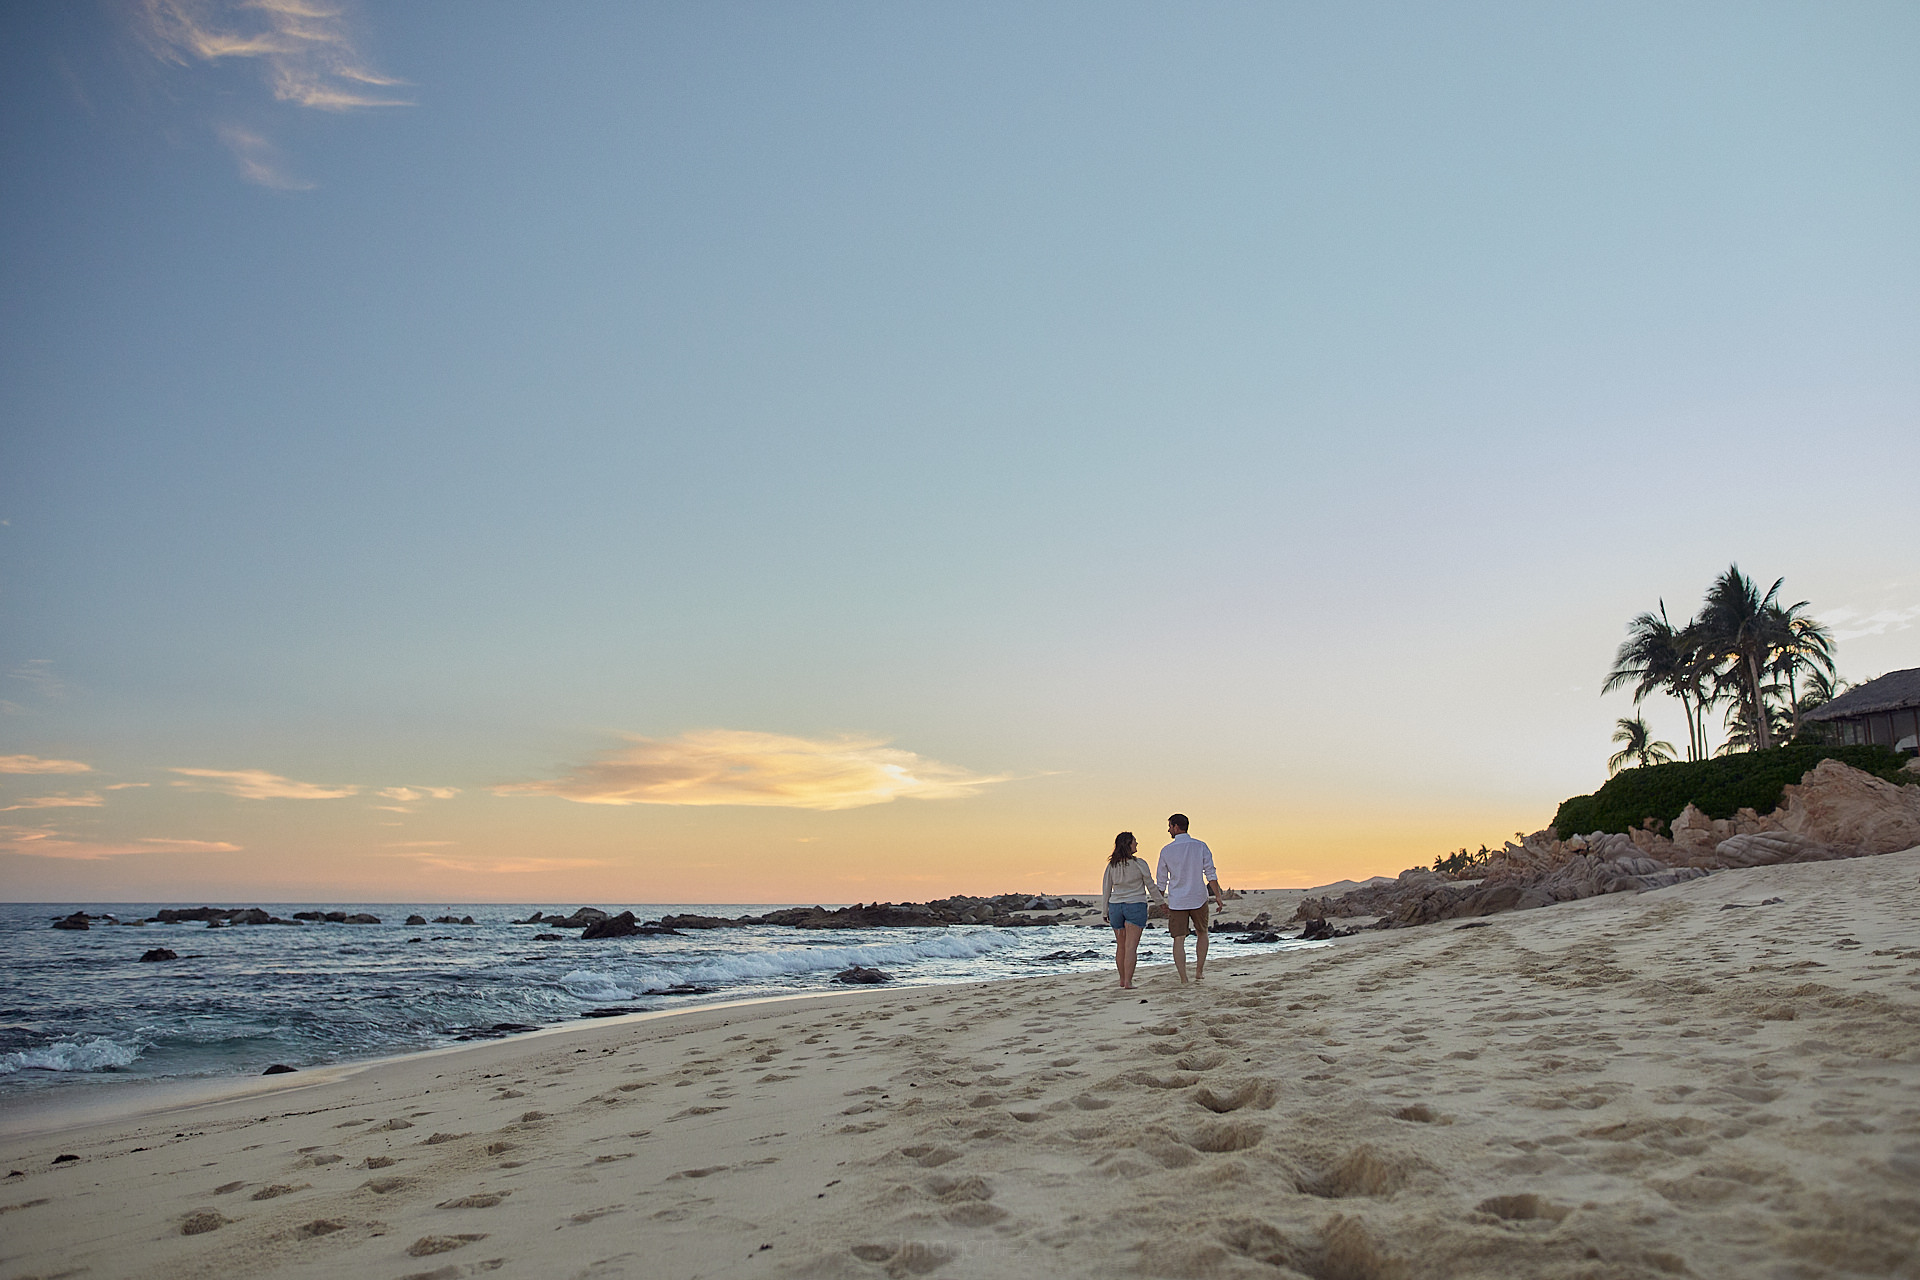 two people walking on a beach at sunset.